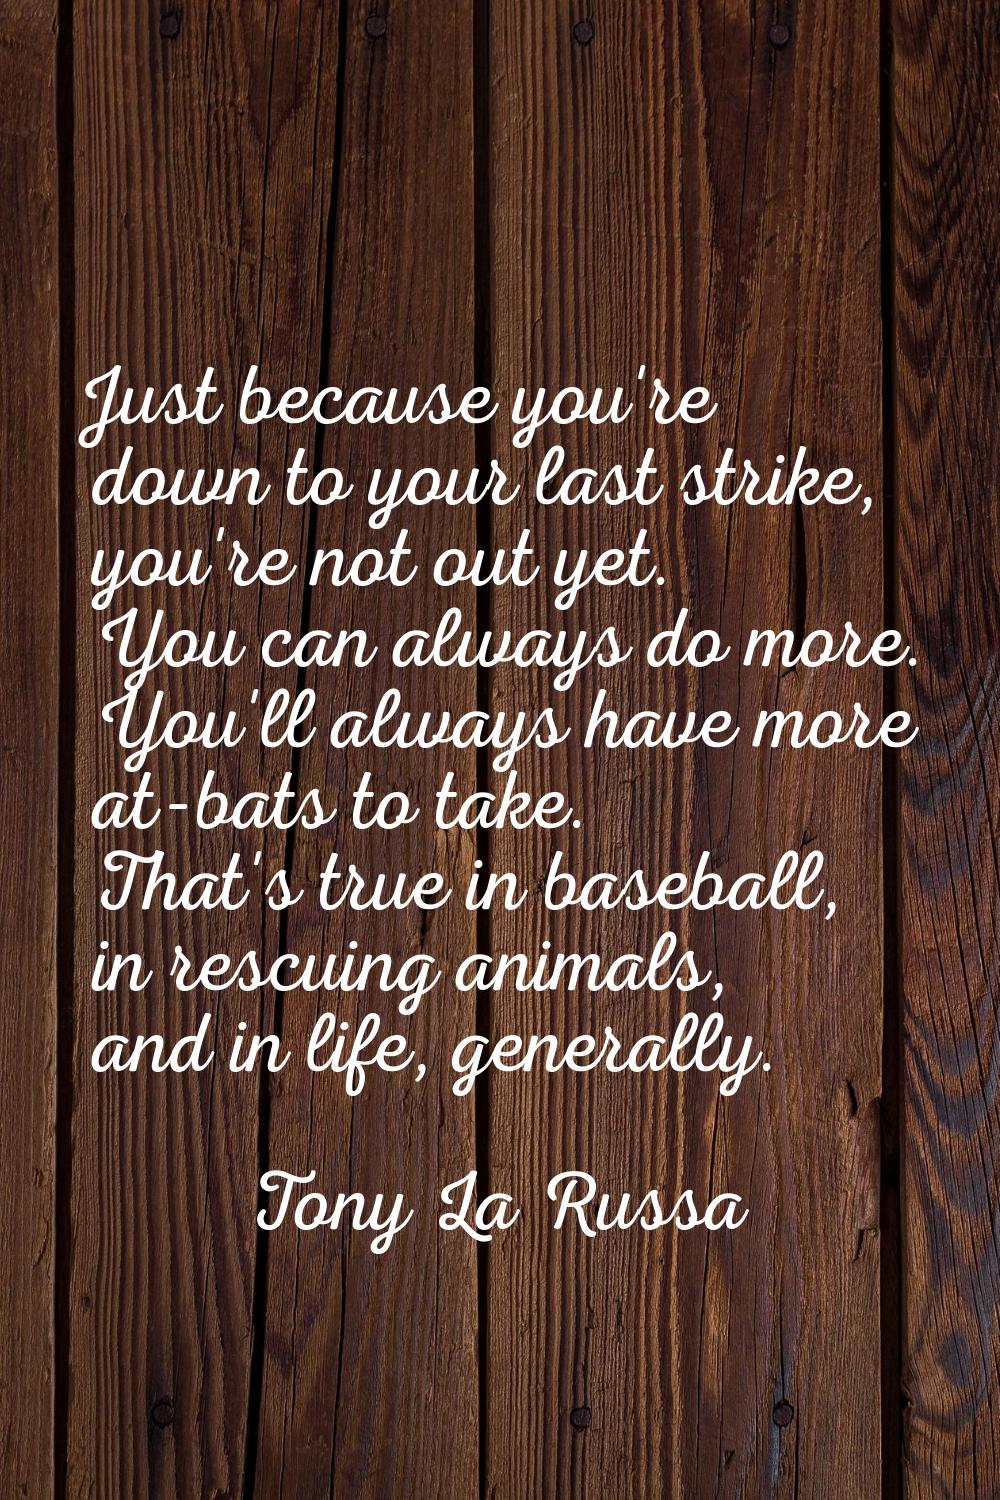 Just because you're down to your last strike, you're not out yet. You can always do more. You'll al